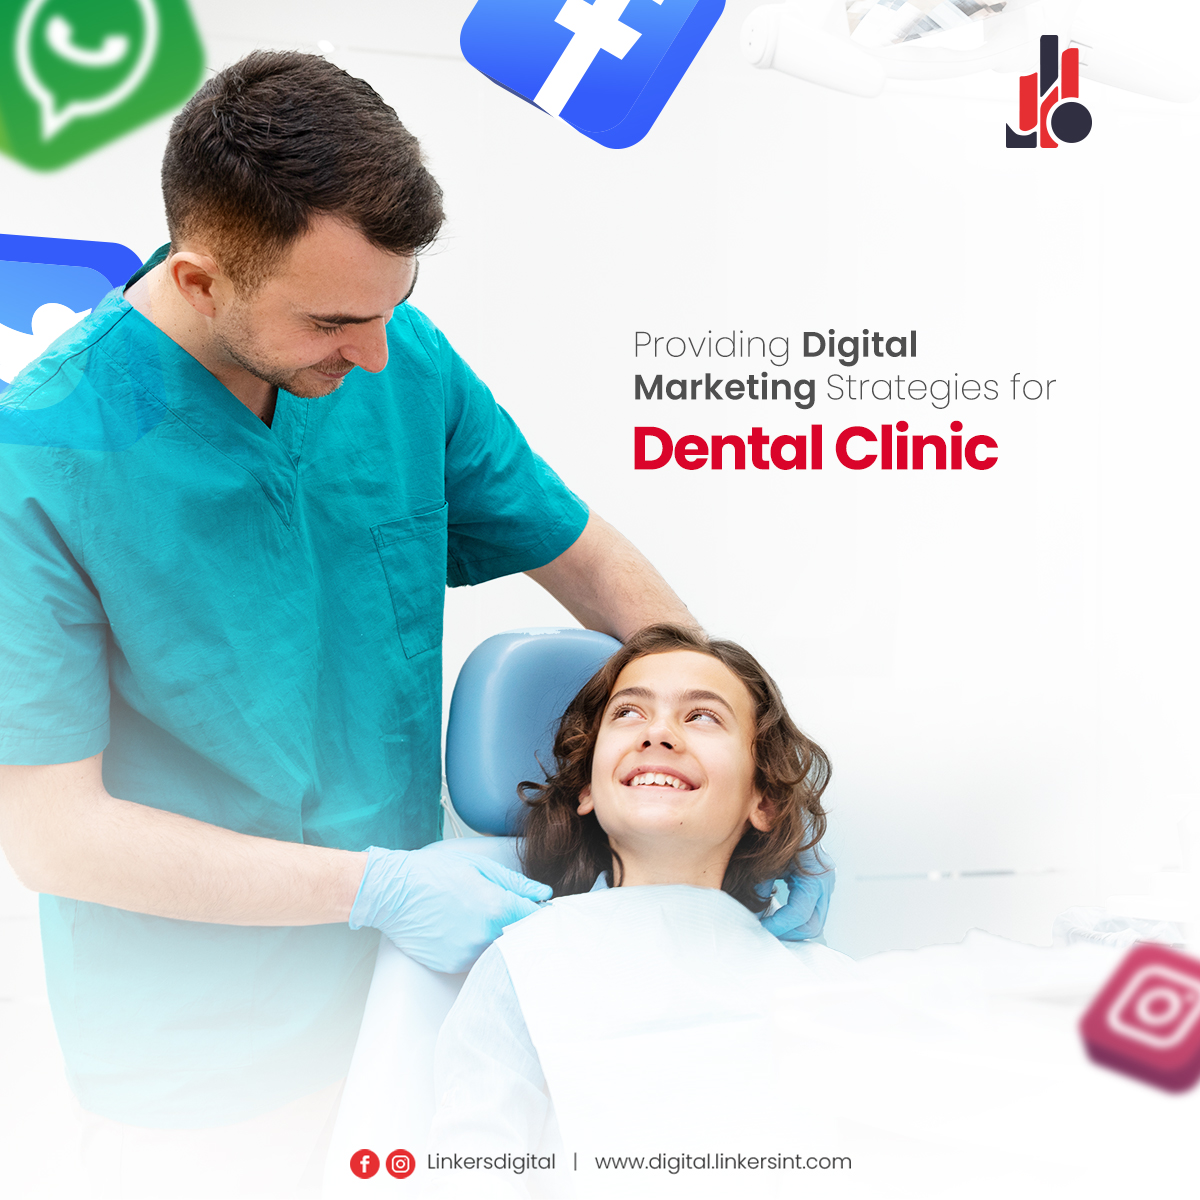 Transform and boost dental practices with our expert digital marketing solutions. Reach new target audience, build a strong online presence, and grow your dental business with our tailored strategies. Let us be your marketing partner in the digital age! #digitalmarketing